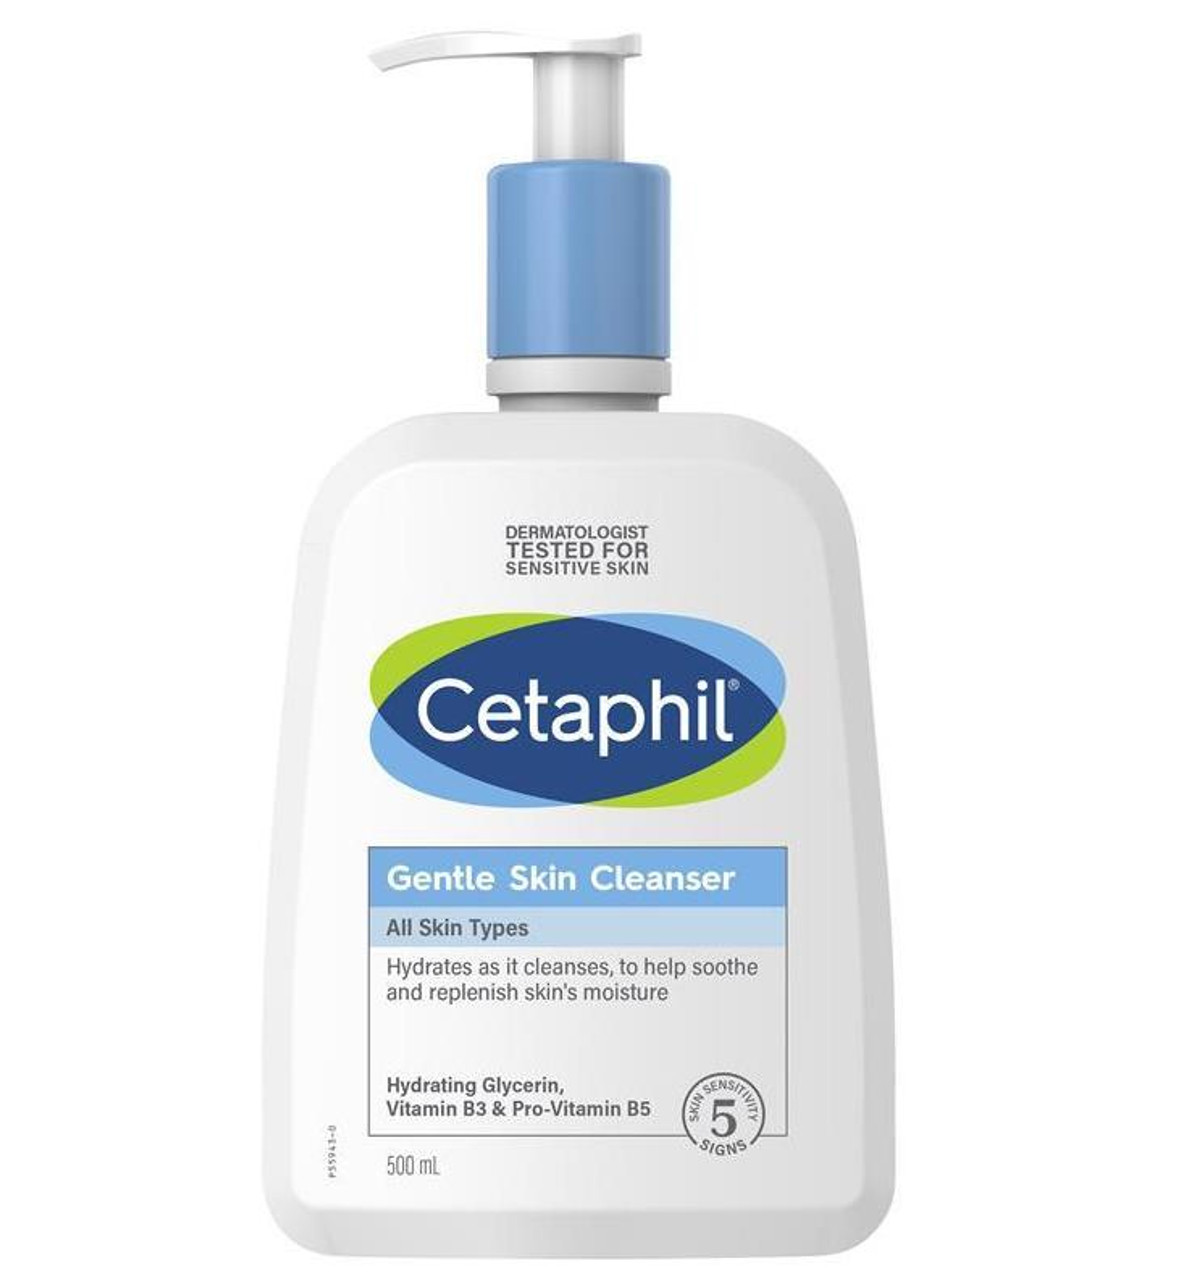 https://cdn11.bigcommerce.com/s-js3ghti4c3/images/stencil/1280x1280/products/3381/27004/cetaphil-gentle-skin-cleanser-500ml-by-sold-by-superpharmacyplus__58760.1690036061.jpg?c=2?imbypass=on